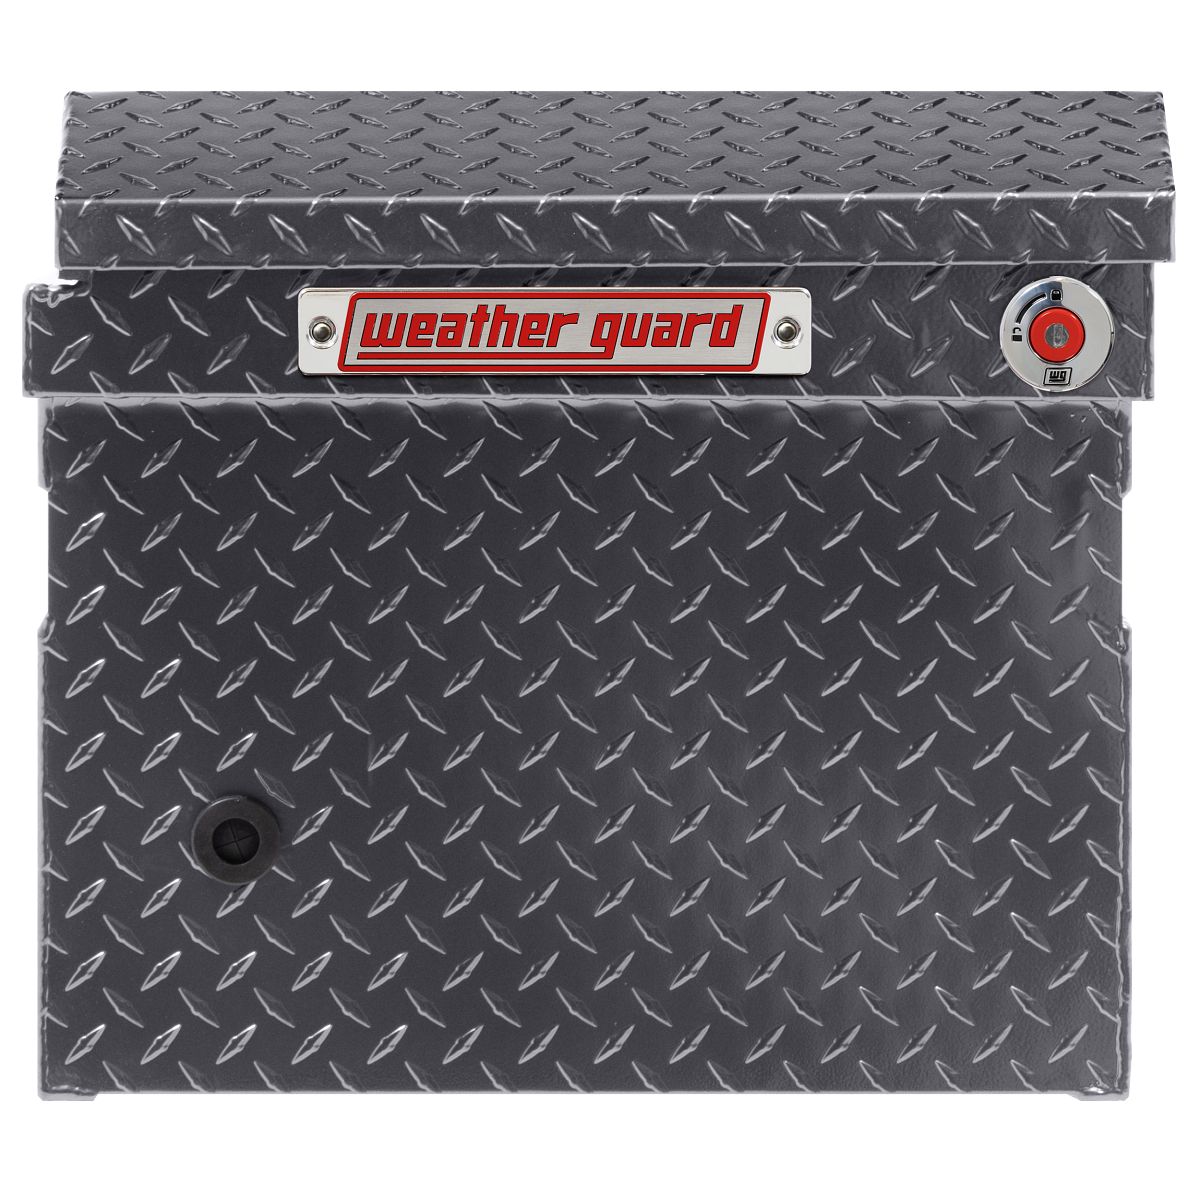 Weather Guard 56 Low Profile Lo-Side Truck Tool Box Aluminum Gray